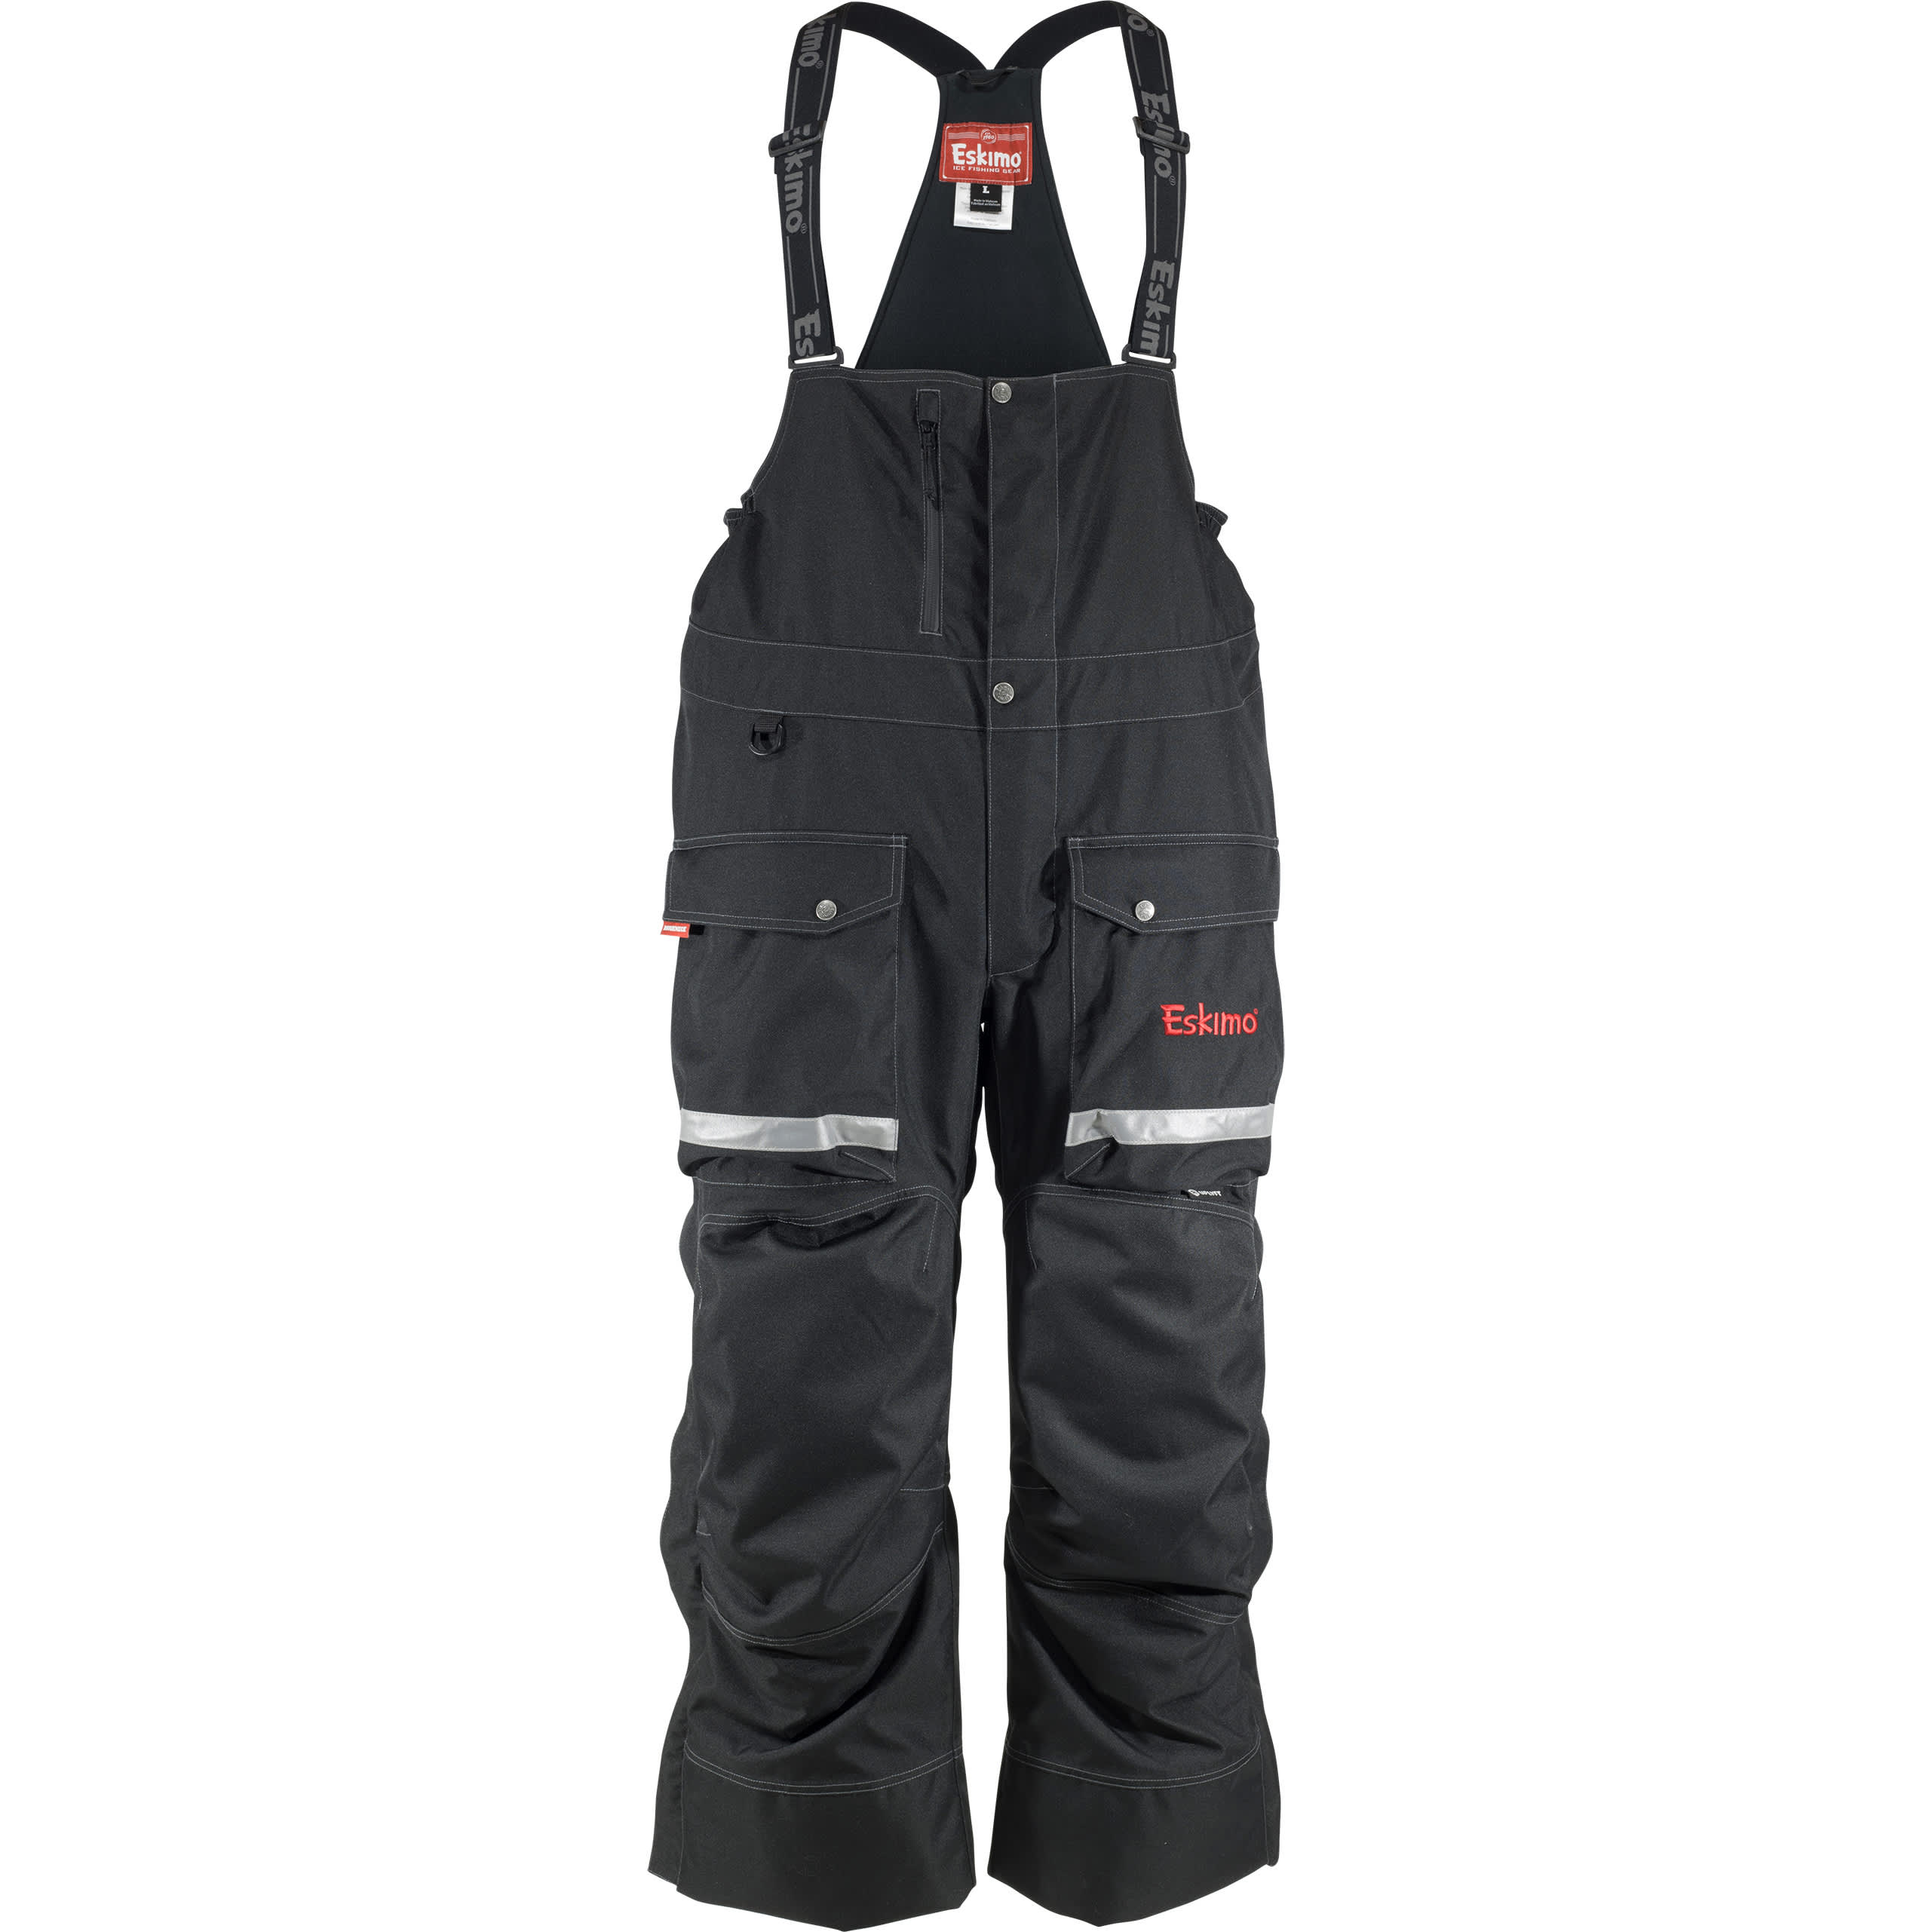 Reeds Review: Eskimo Keeper Ice Suit 